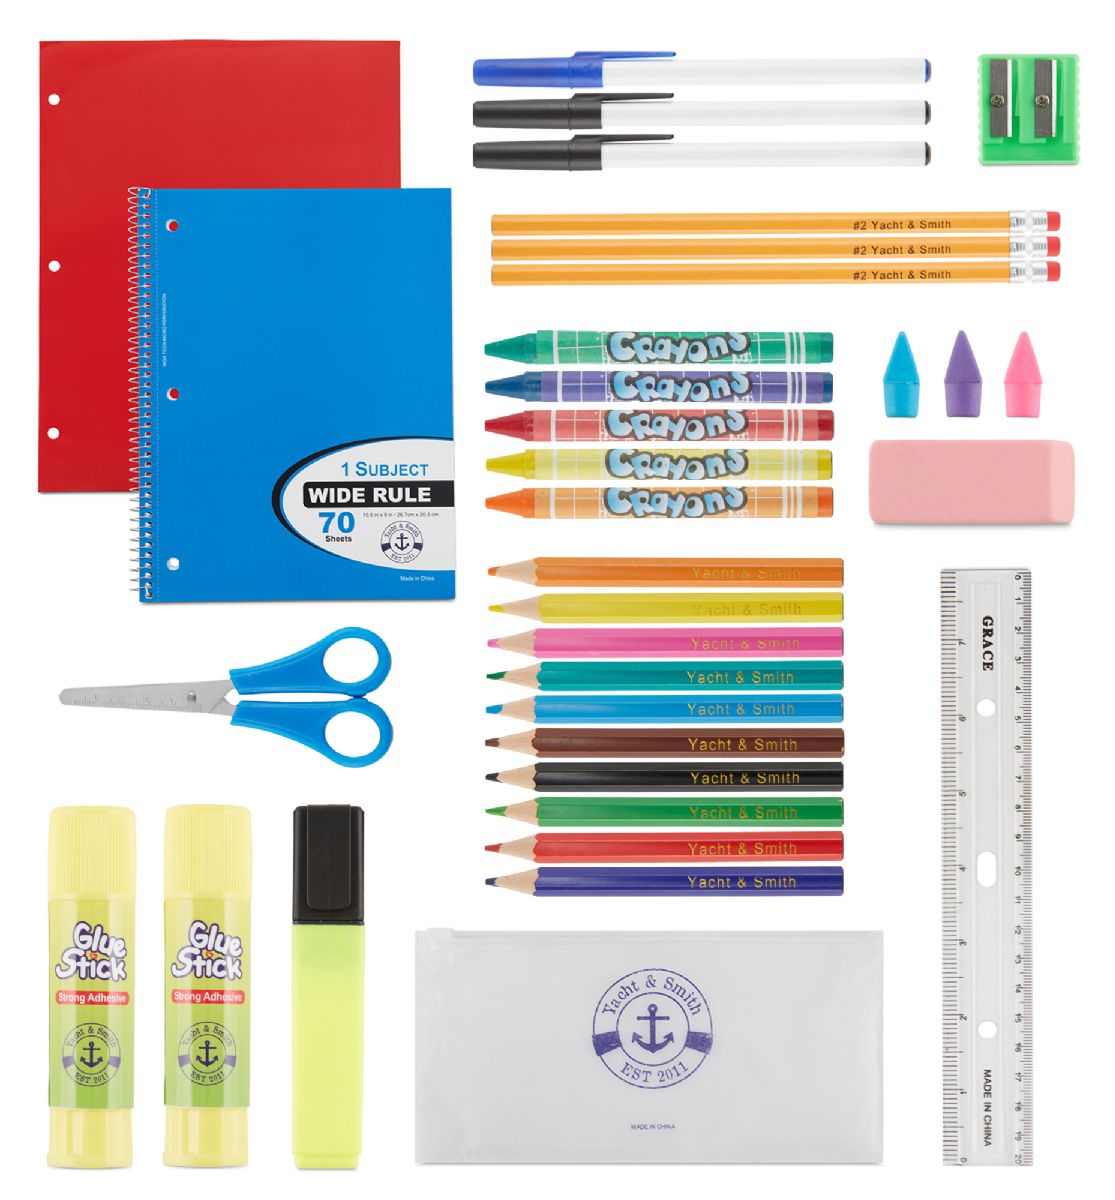 12 Sets of Yacht & Smith 34 Pack Preassembled School Supply Kit K-12